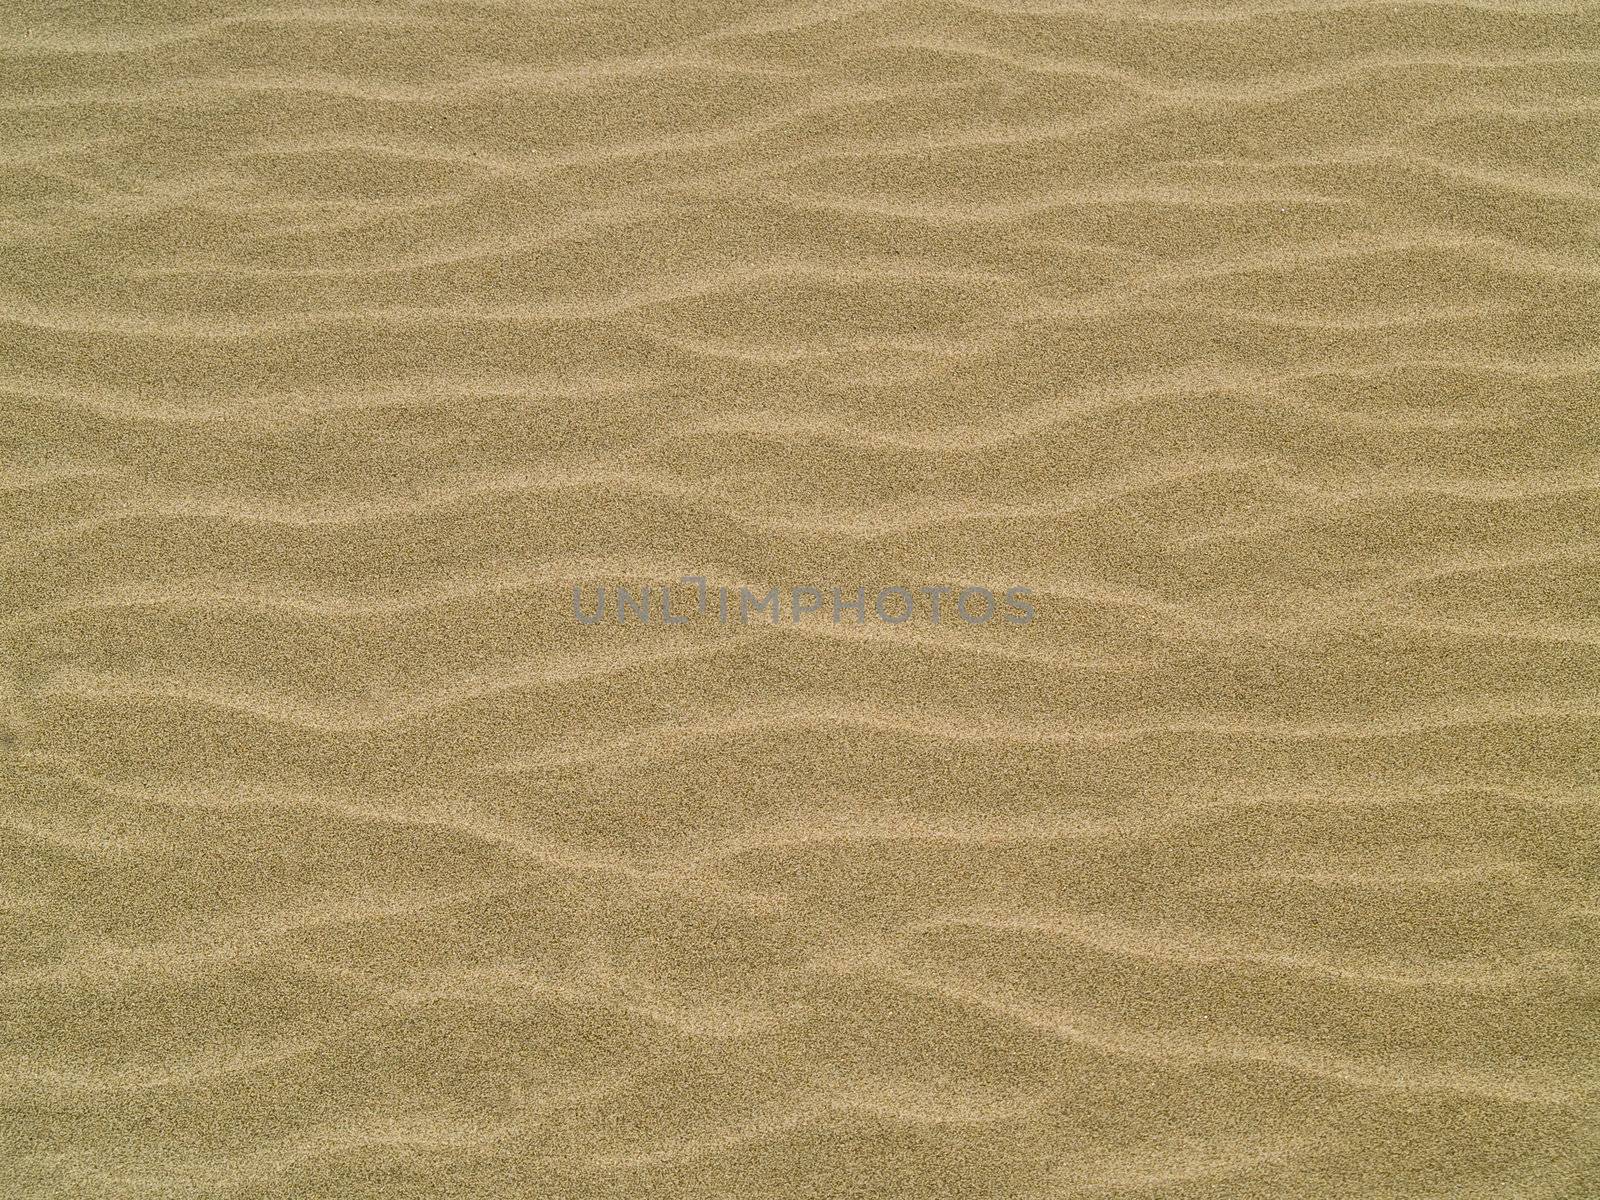 Abstract background of sand ripples at the beach by Frankljunior